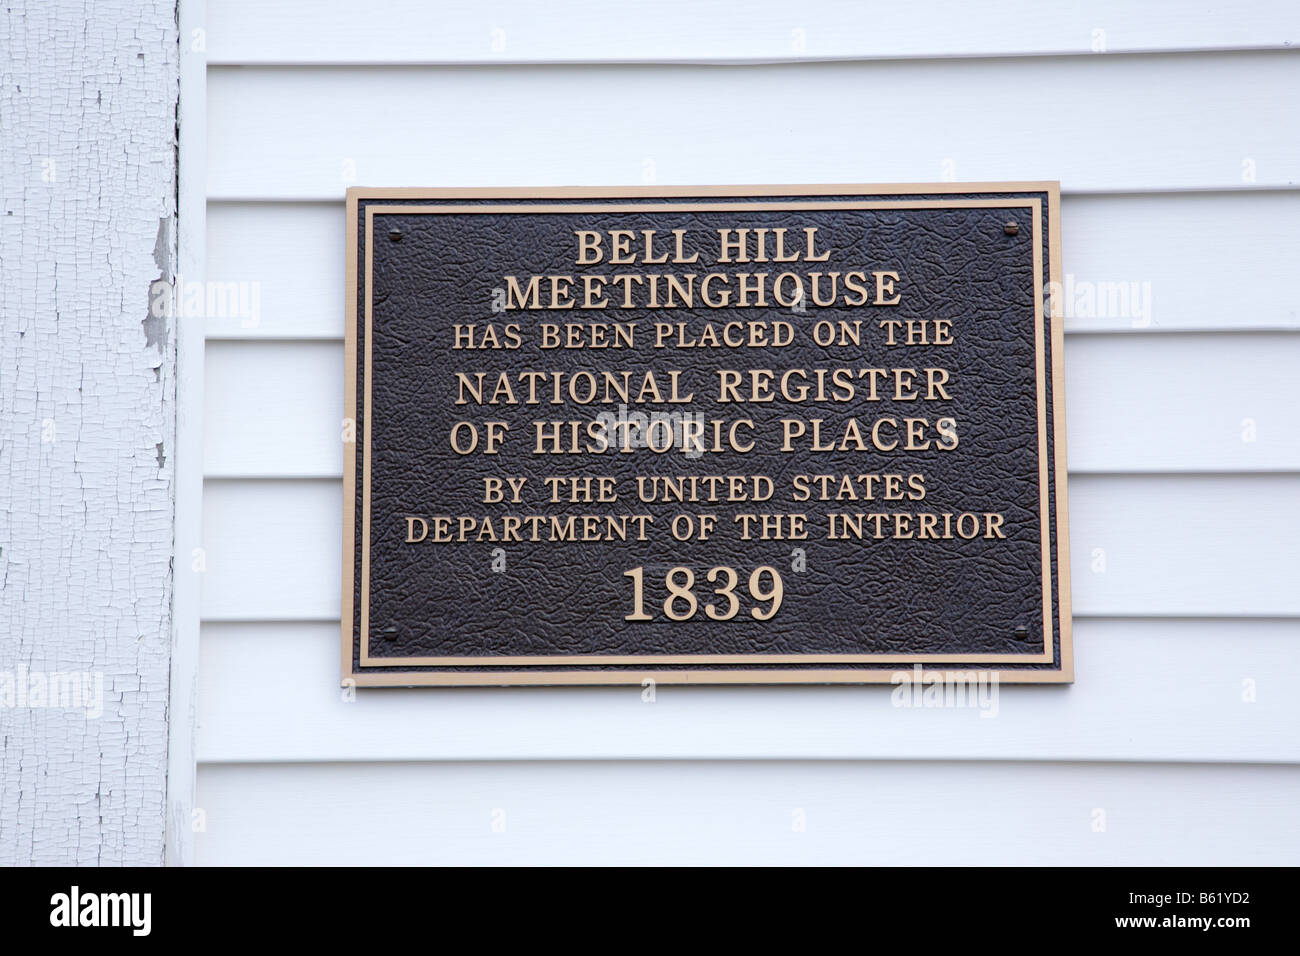 Bell Hill Meeting House during the autumn months Located in Otisfield Maine USA Stock Photo